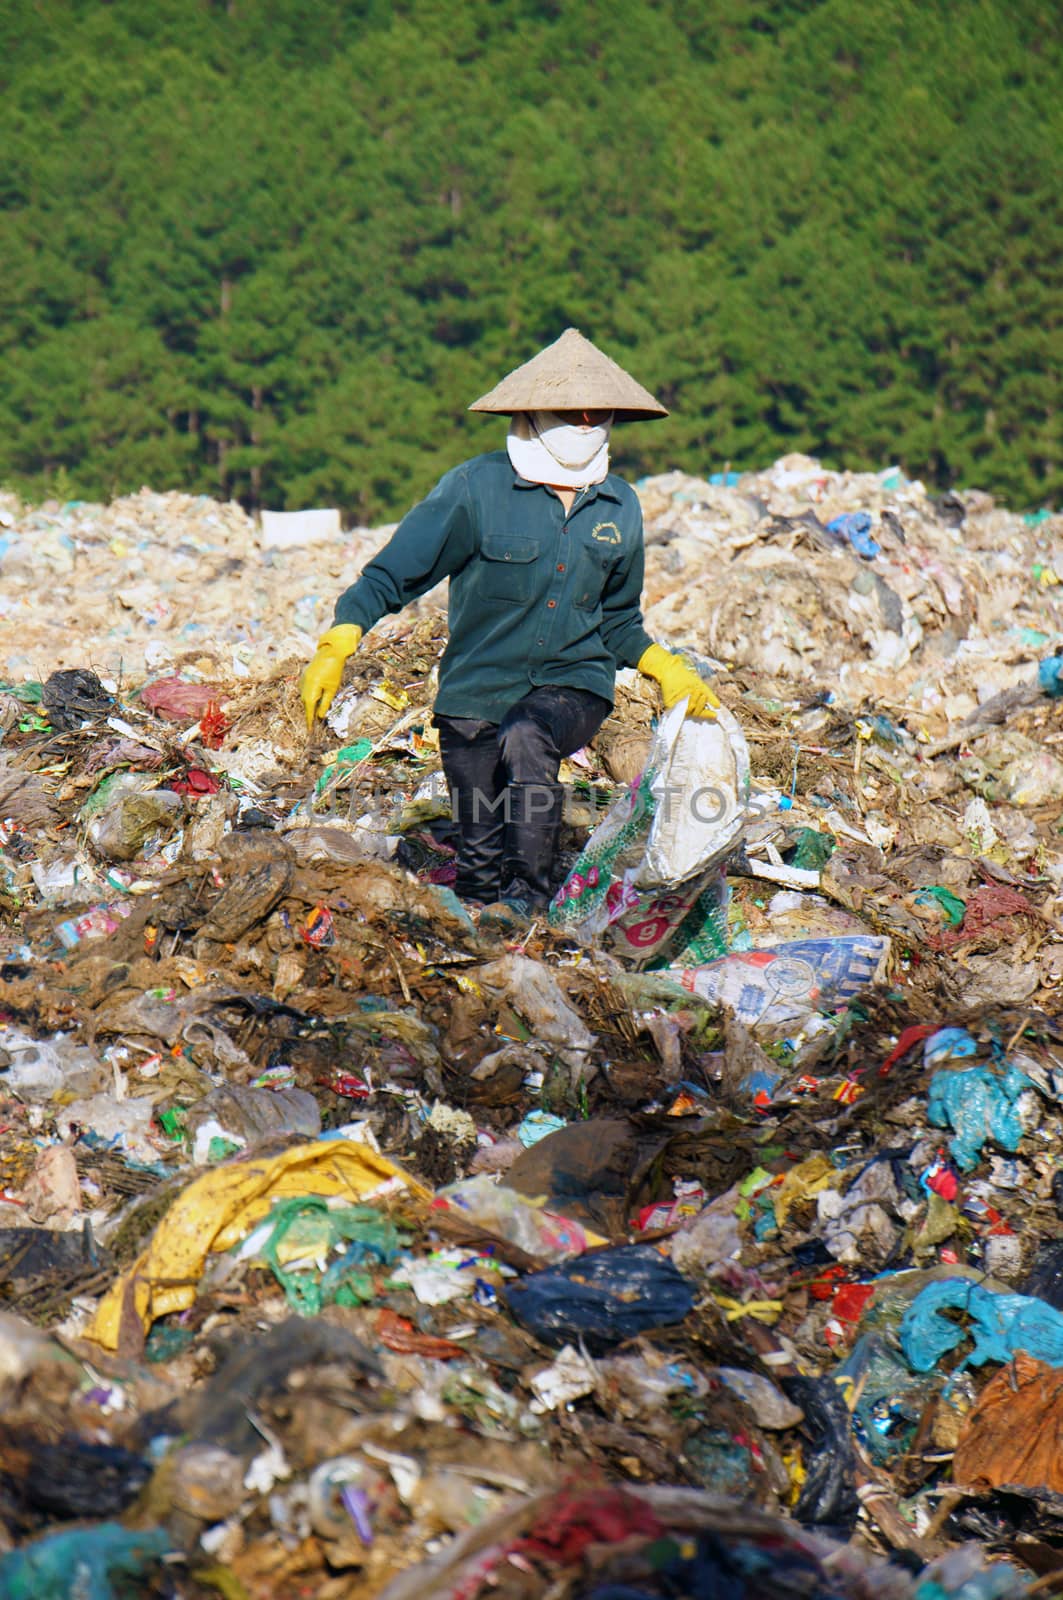 People pick up garbage at landfill by xuanhuongho